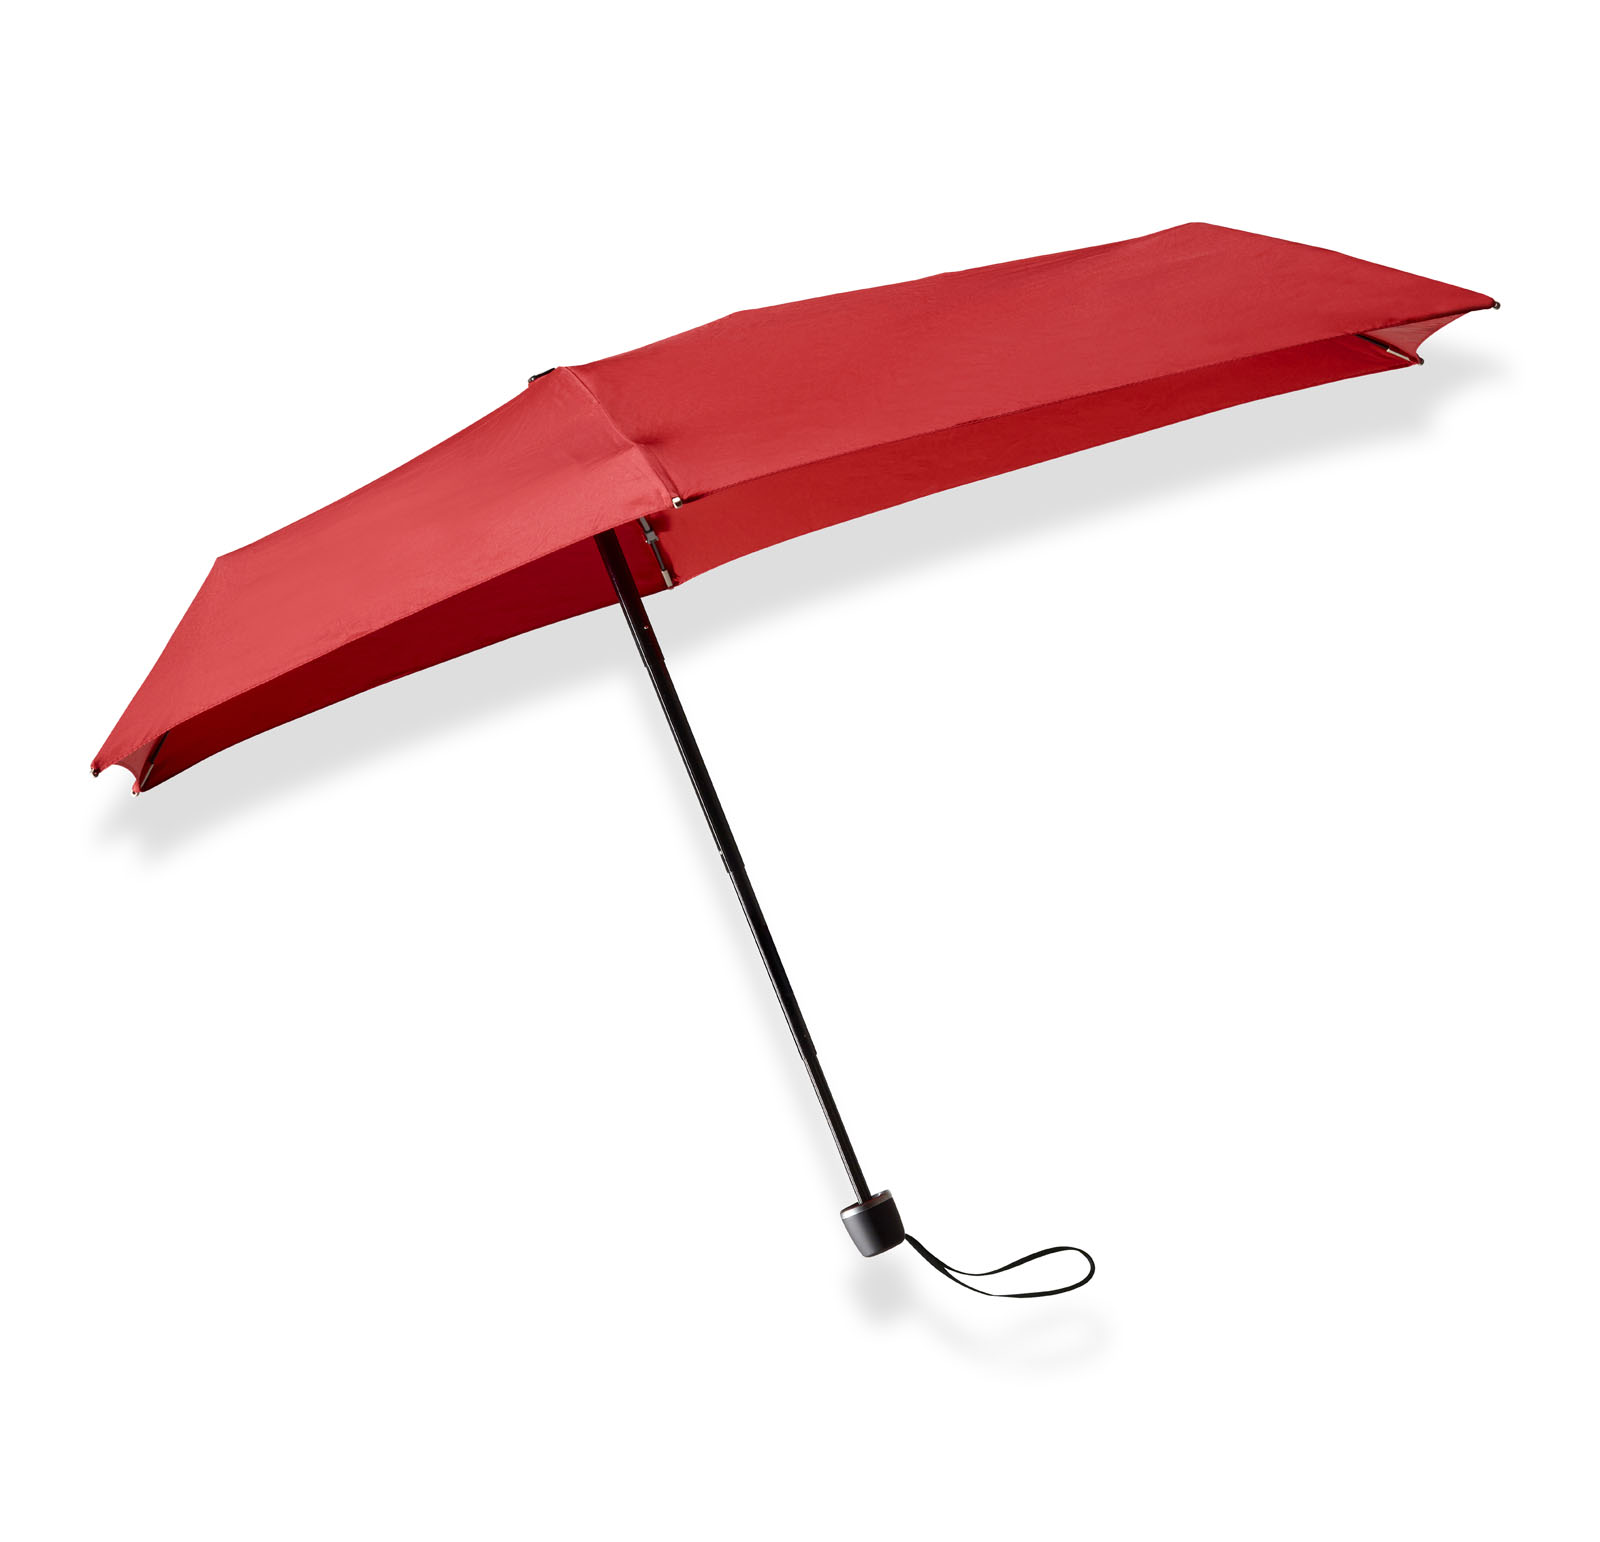 Anekdote Publiciteit interview Buy a red foldable umbrella micro? senz° micro passion red